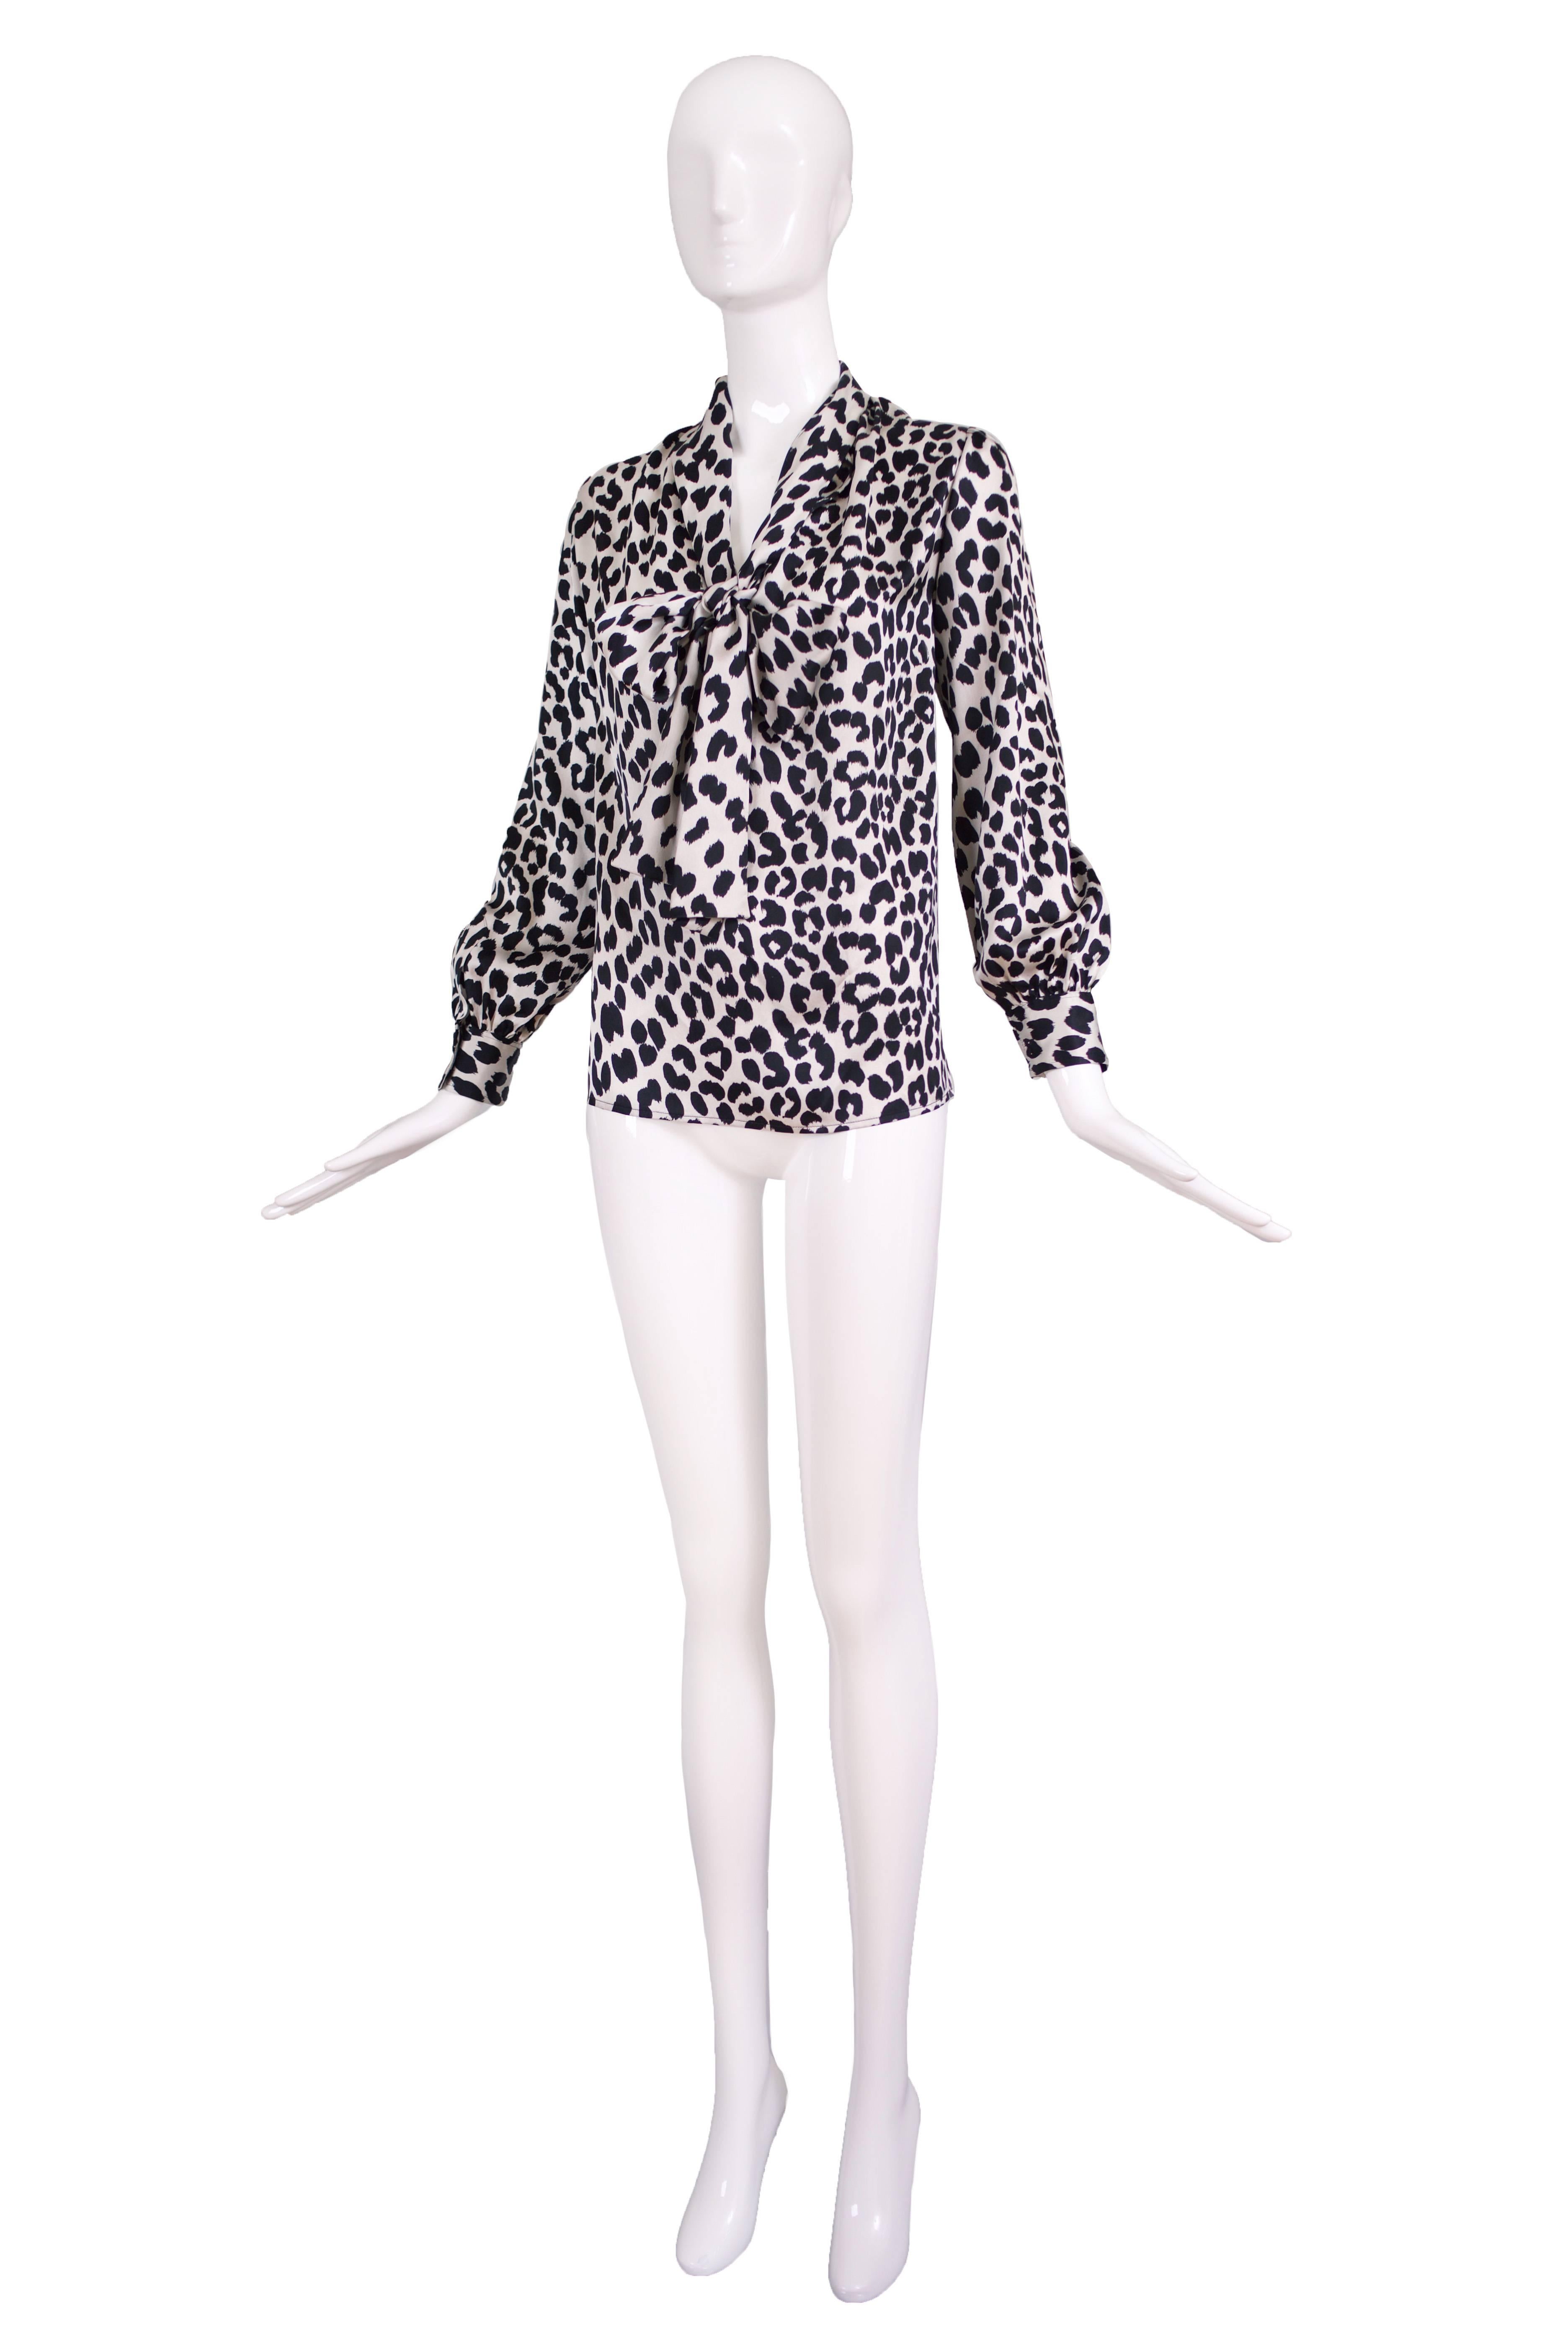 1970's Yves Saint Laurent black and white silk leopard print blouse w/neck ties - can be worn tied high or in a low hanging bow. In excellent condition. Size tag 36. Please consult measurements.
MEASUREMENTS:
Bust - 44